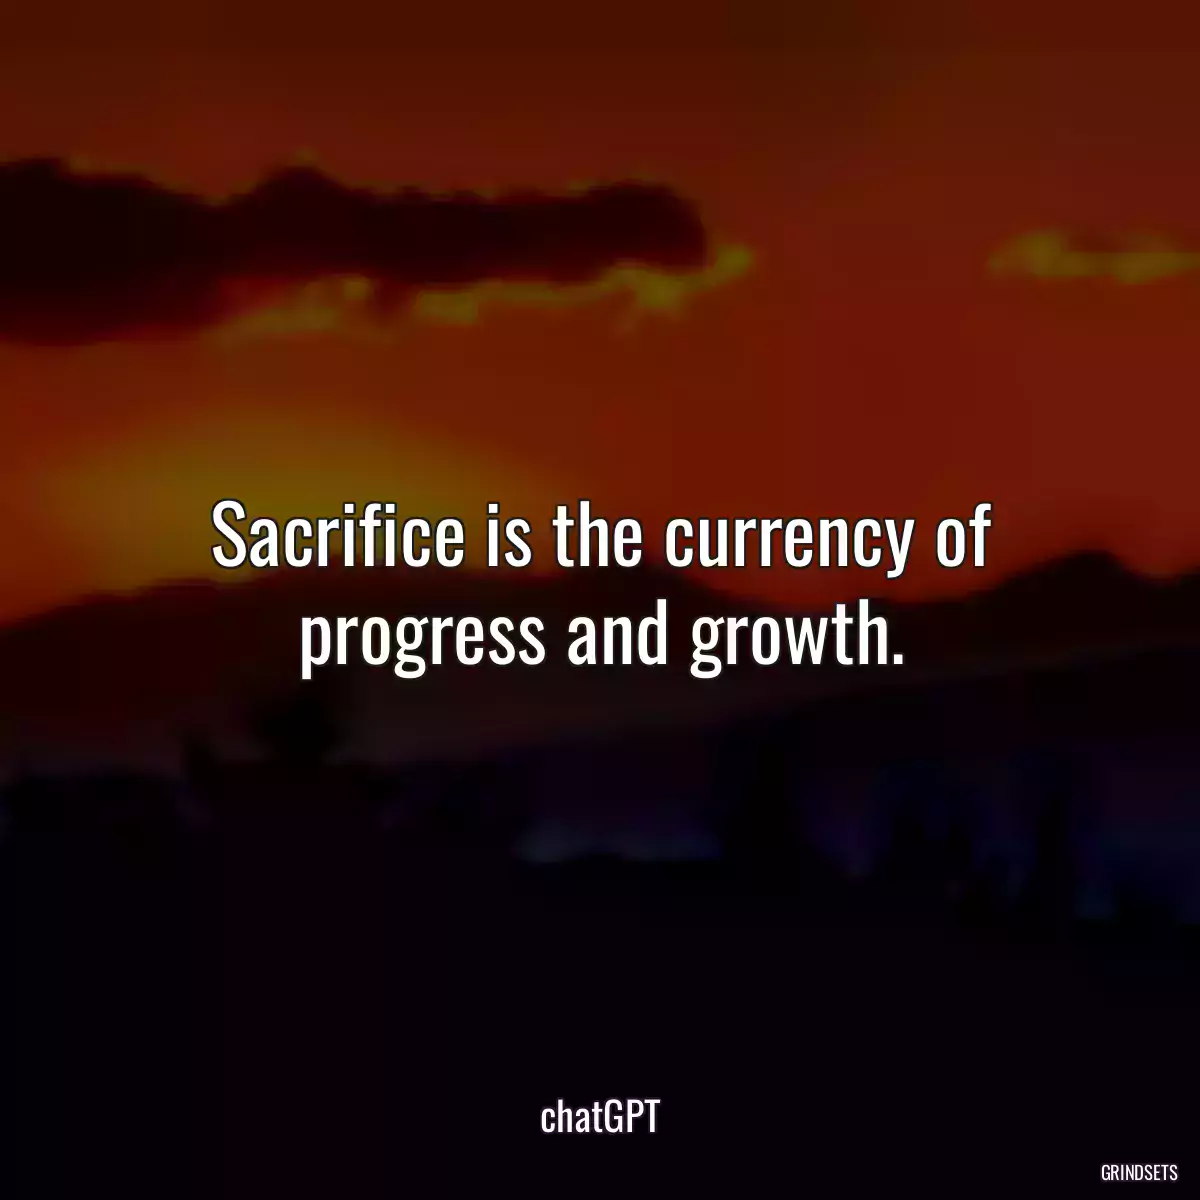 Sacrifice is the currency of progress and growth.